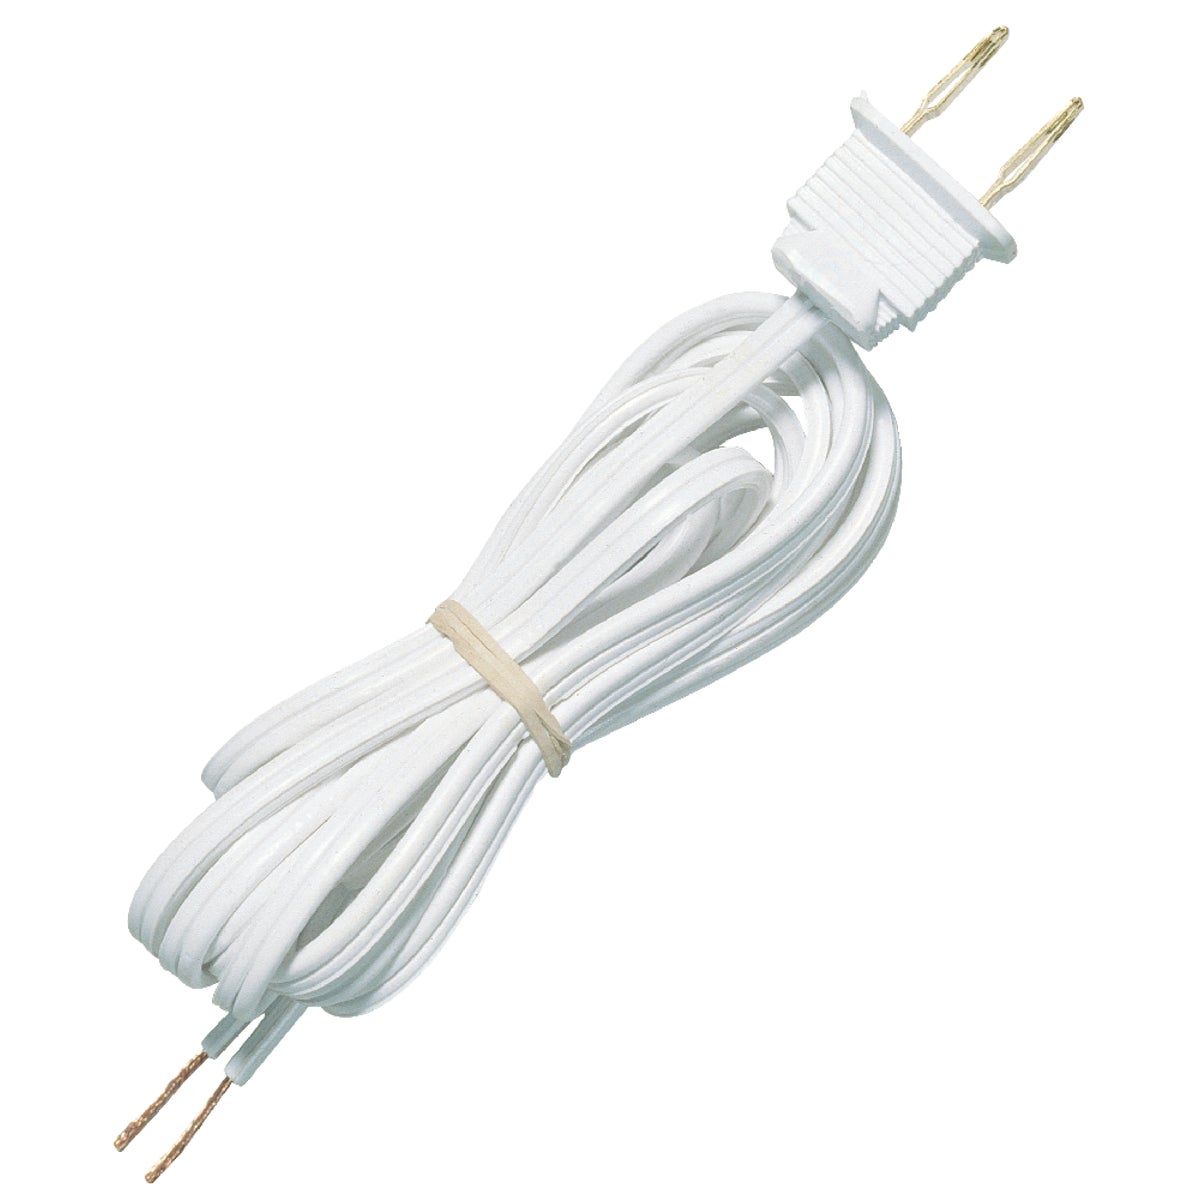 Westinghouse 8 Ft. 18 Ga. White Replacement Lamp Cord